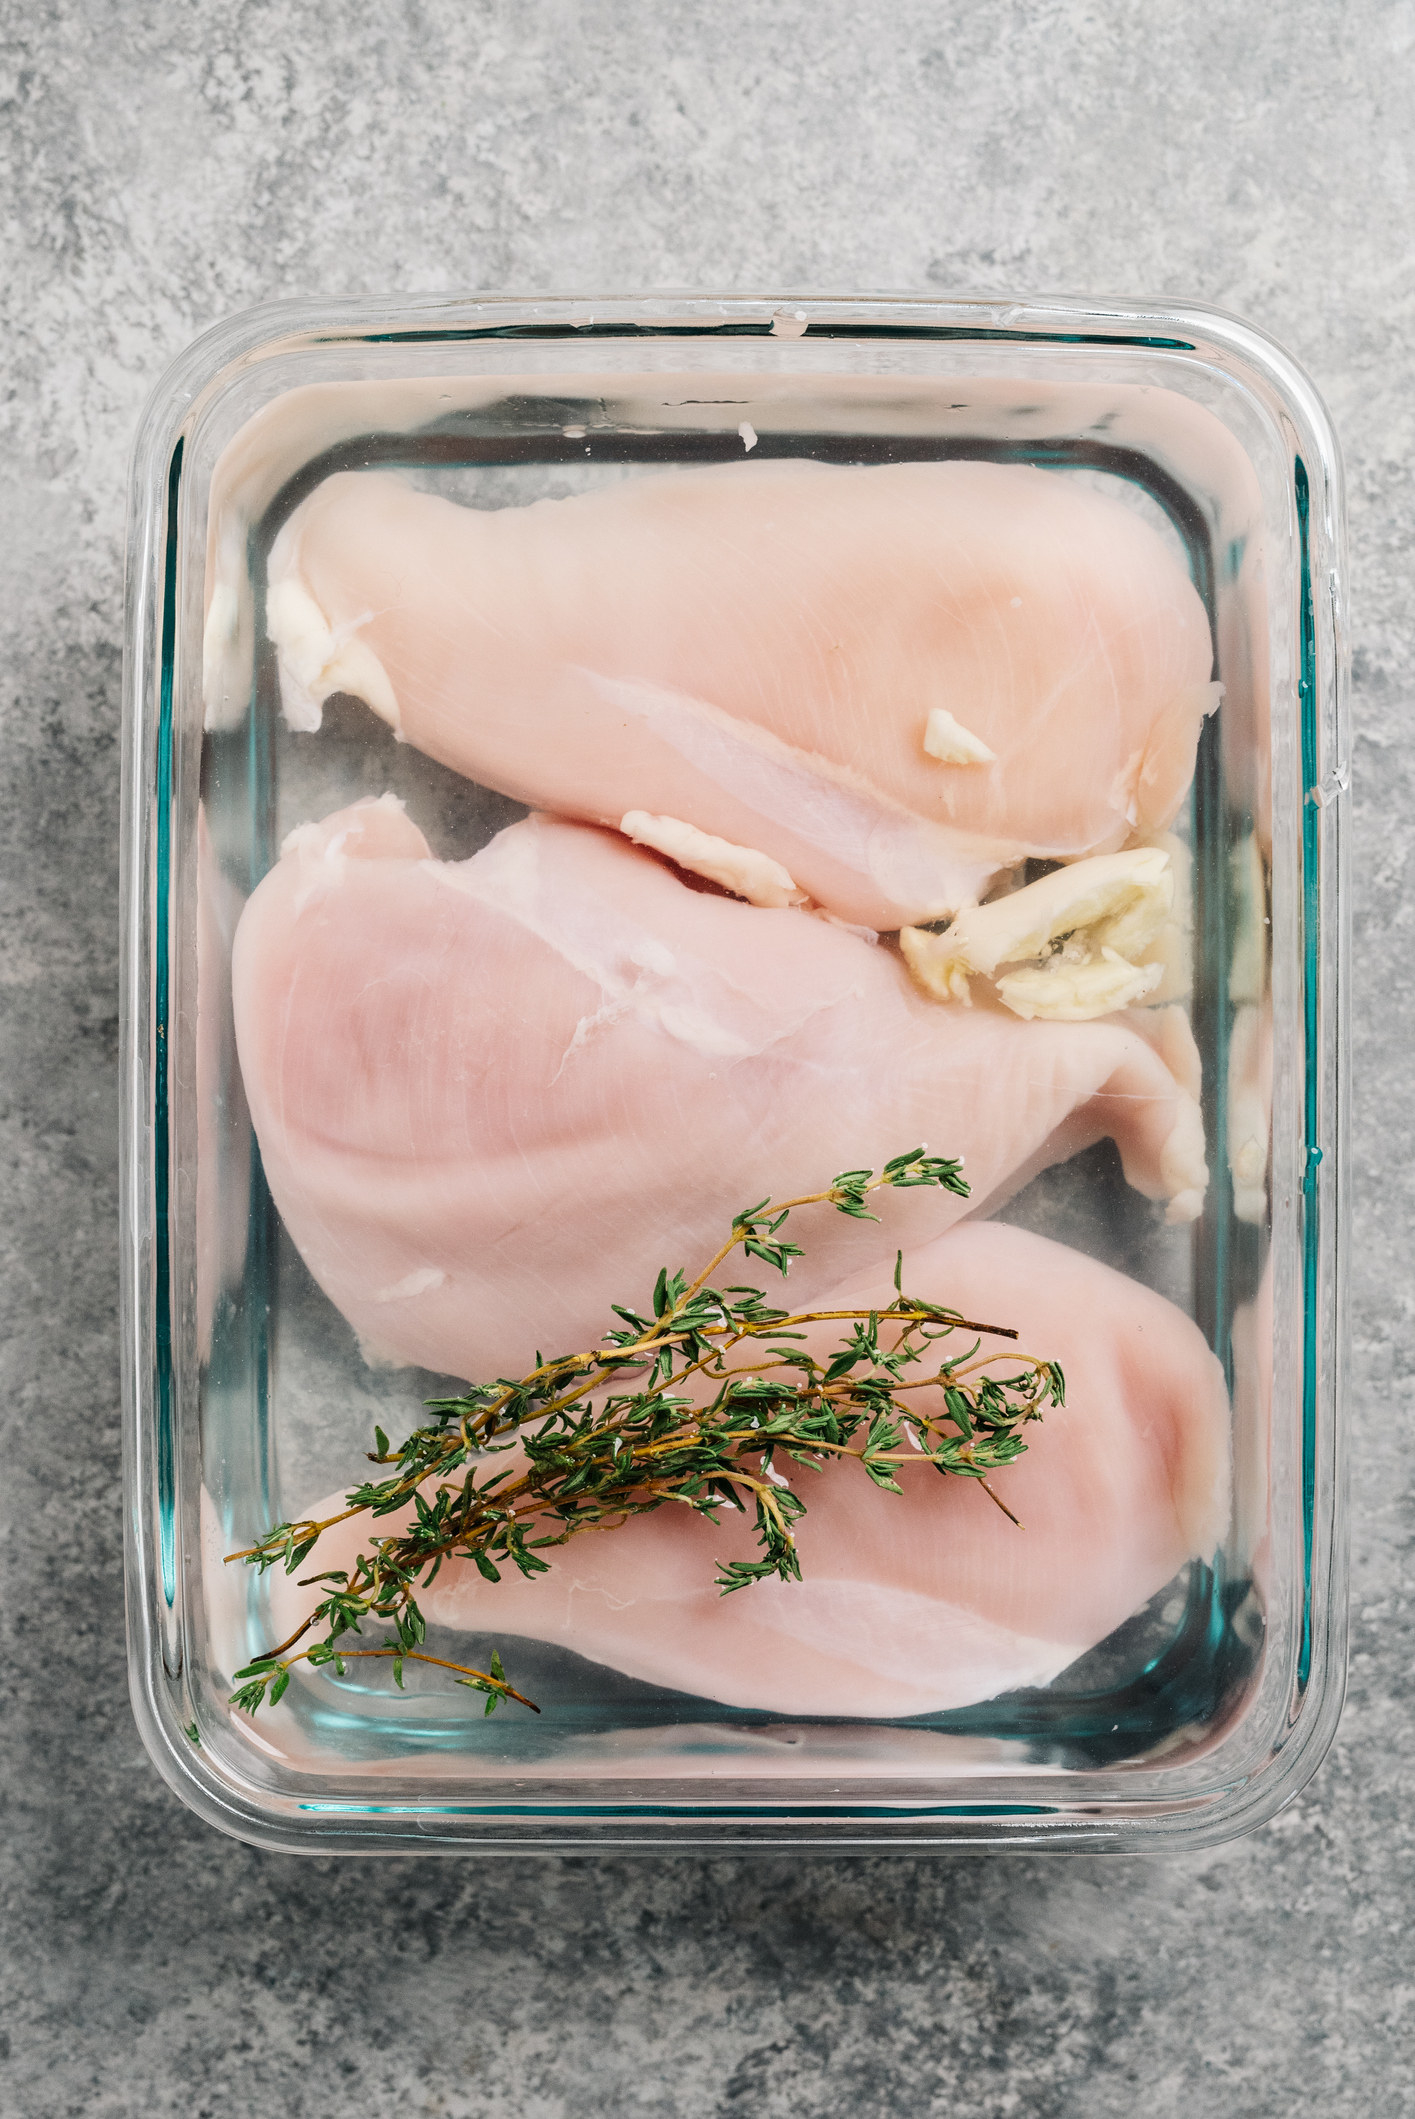 Raw chicken in a glass baking pan